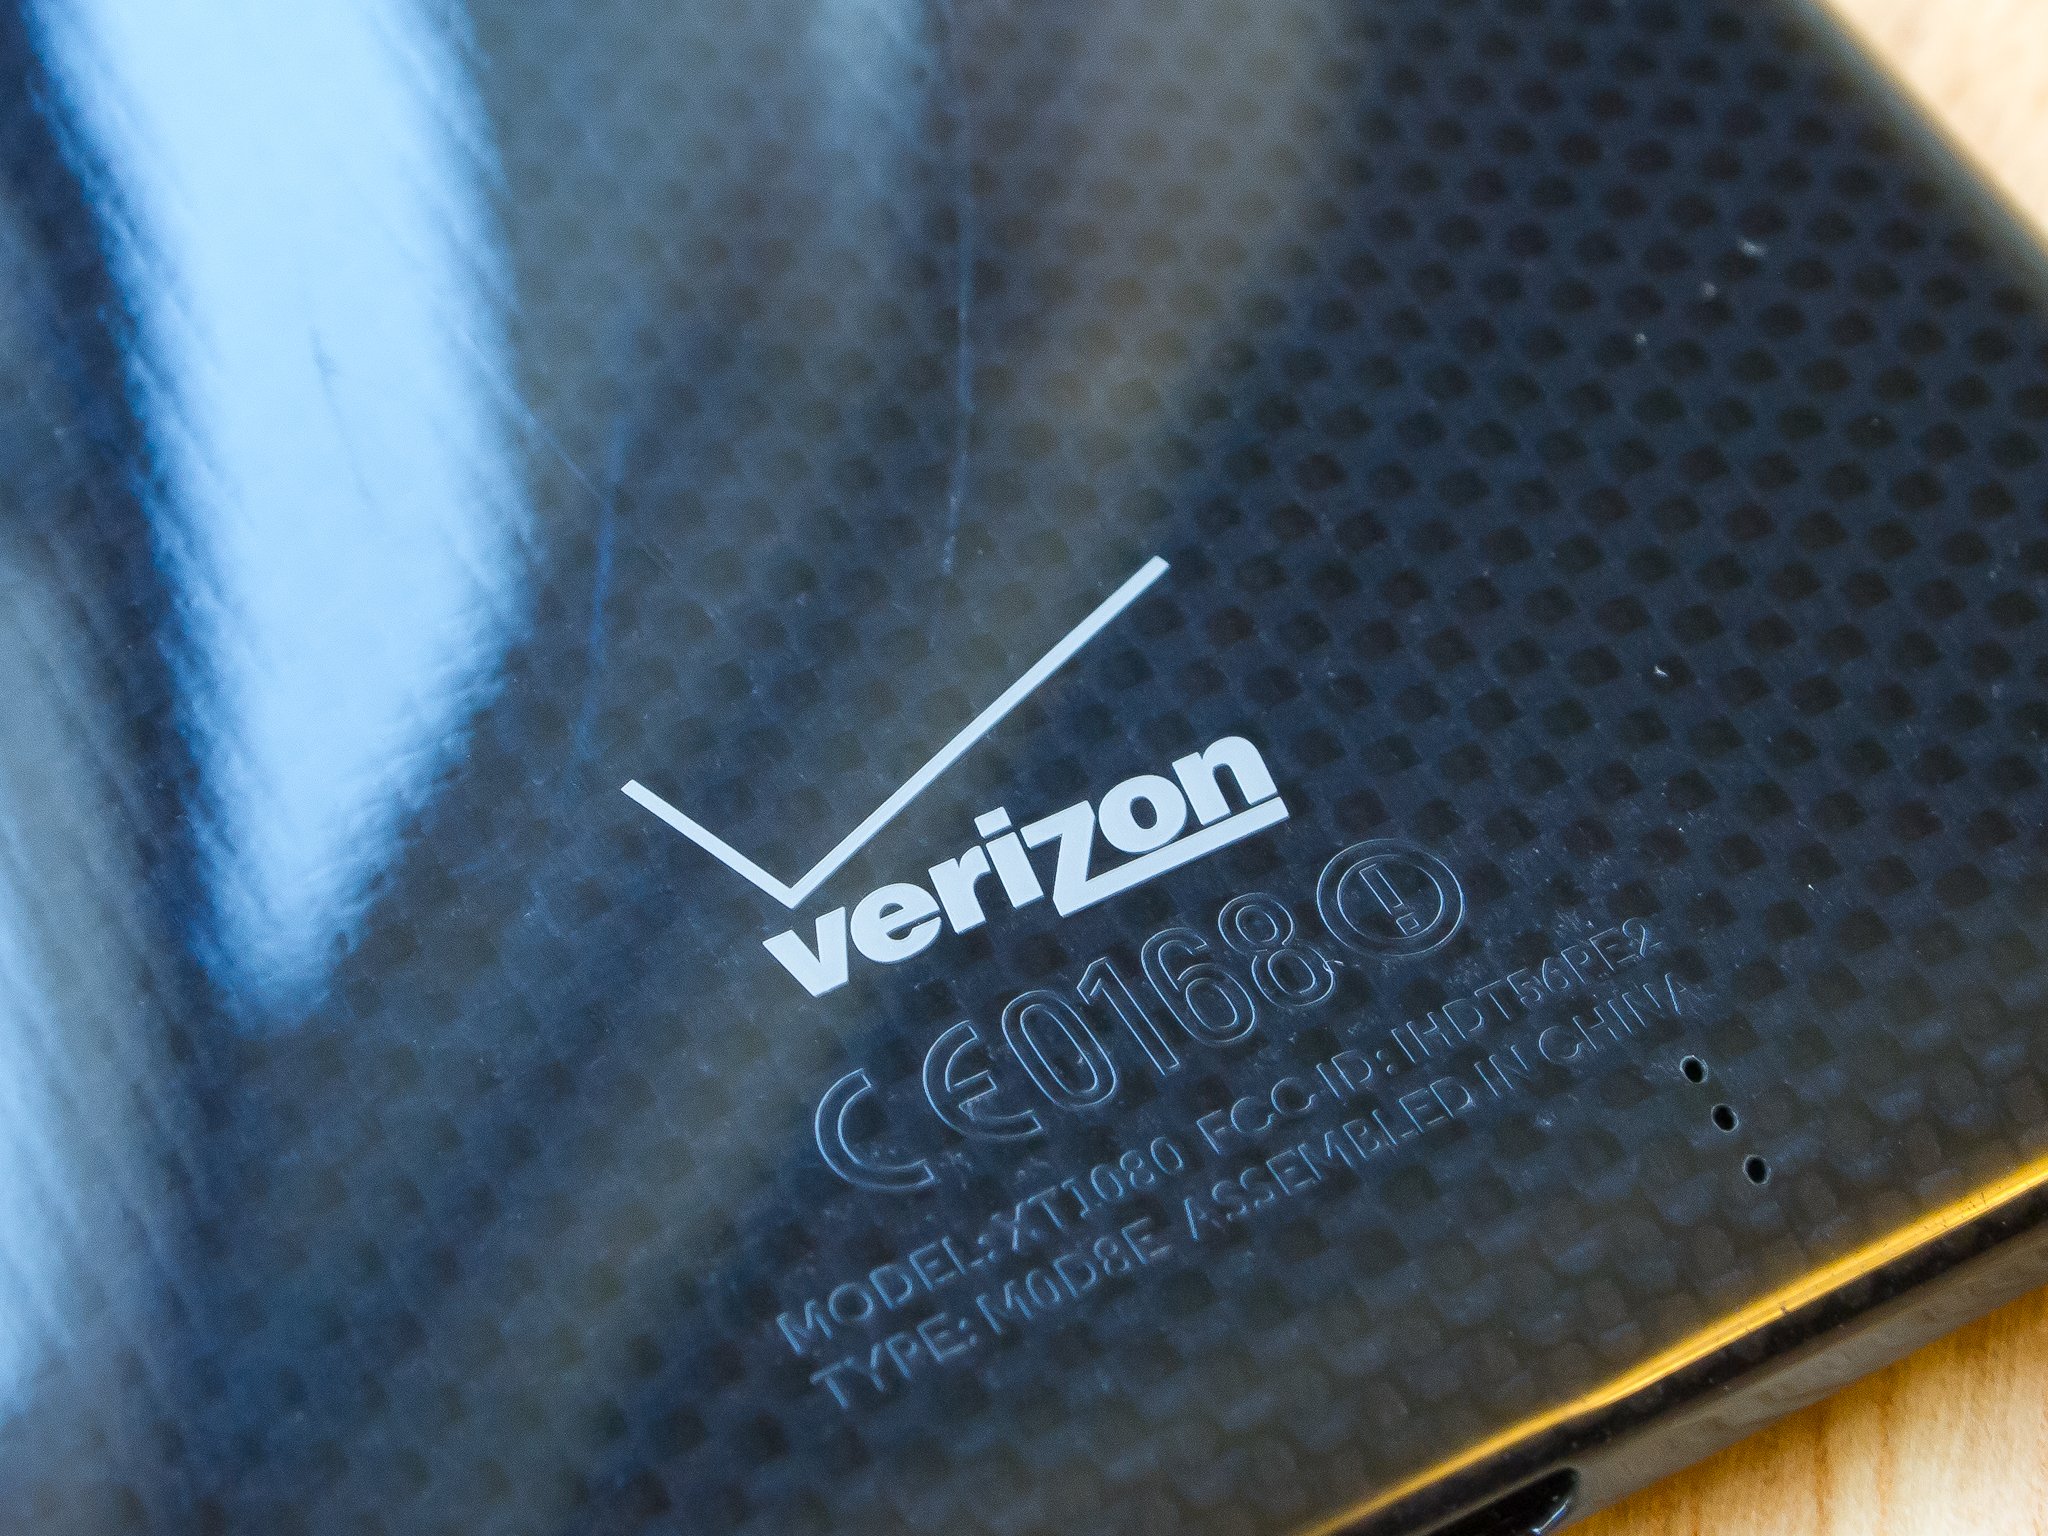 Verizon wants you to buy apps from them, not Google